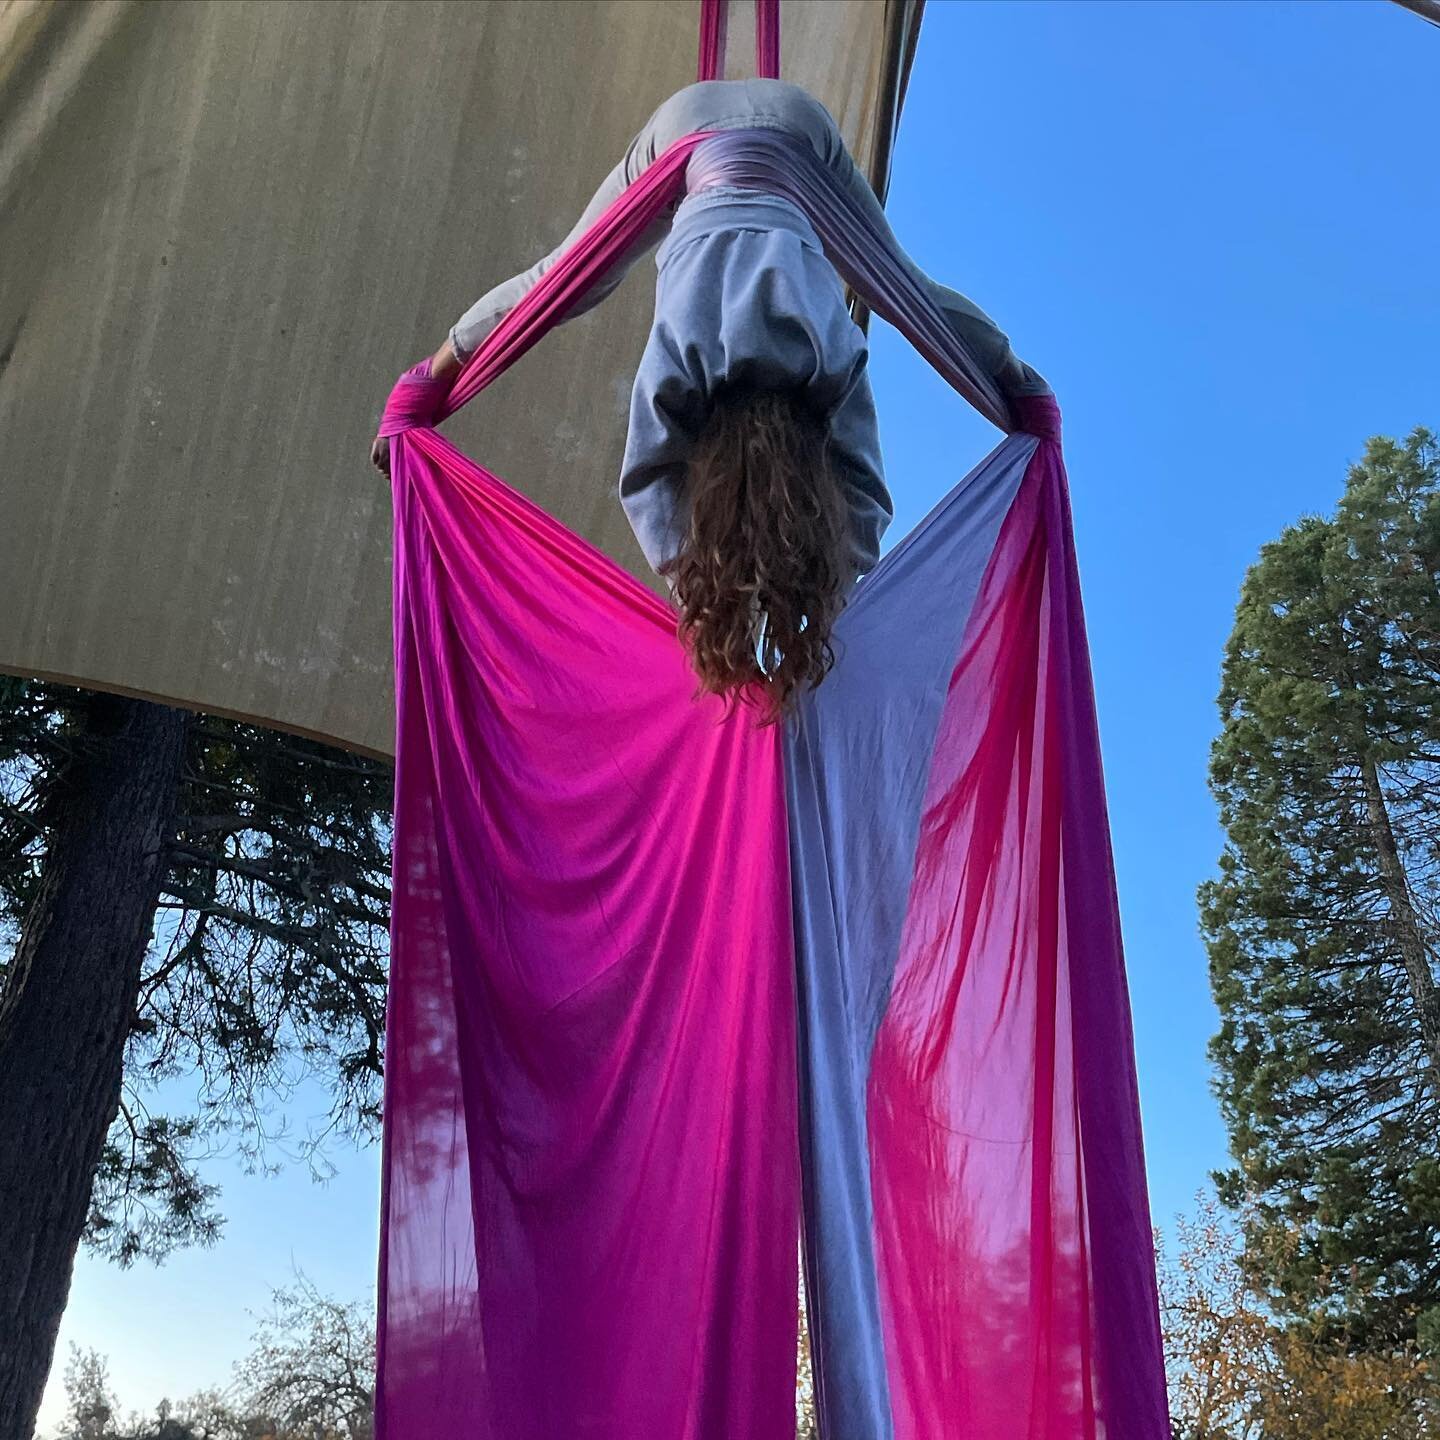 I don&rsquo;t often look forward to Mondays, but when the sun is shining &amp; the new @firetoys_inc silks are up, we&rsquo;ll start the week off right 🌞 

DM to reserve your 1:1 or small group lesson this Monday (12/11.)
Spots are open between 11:3